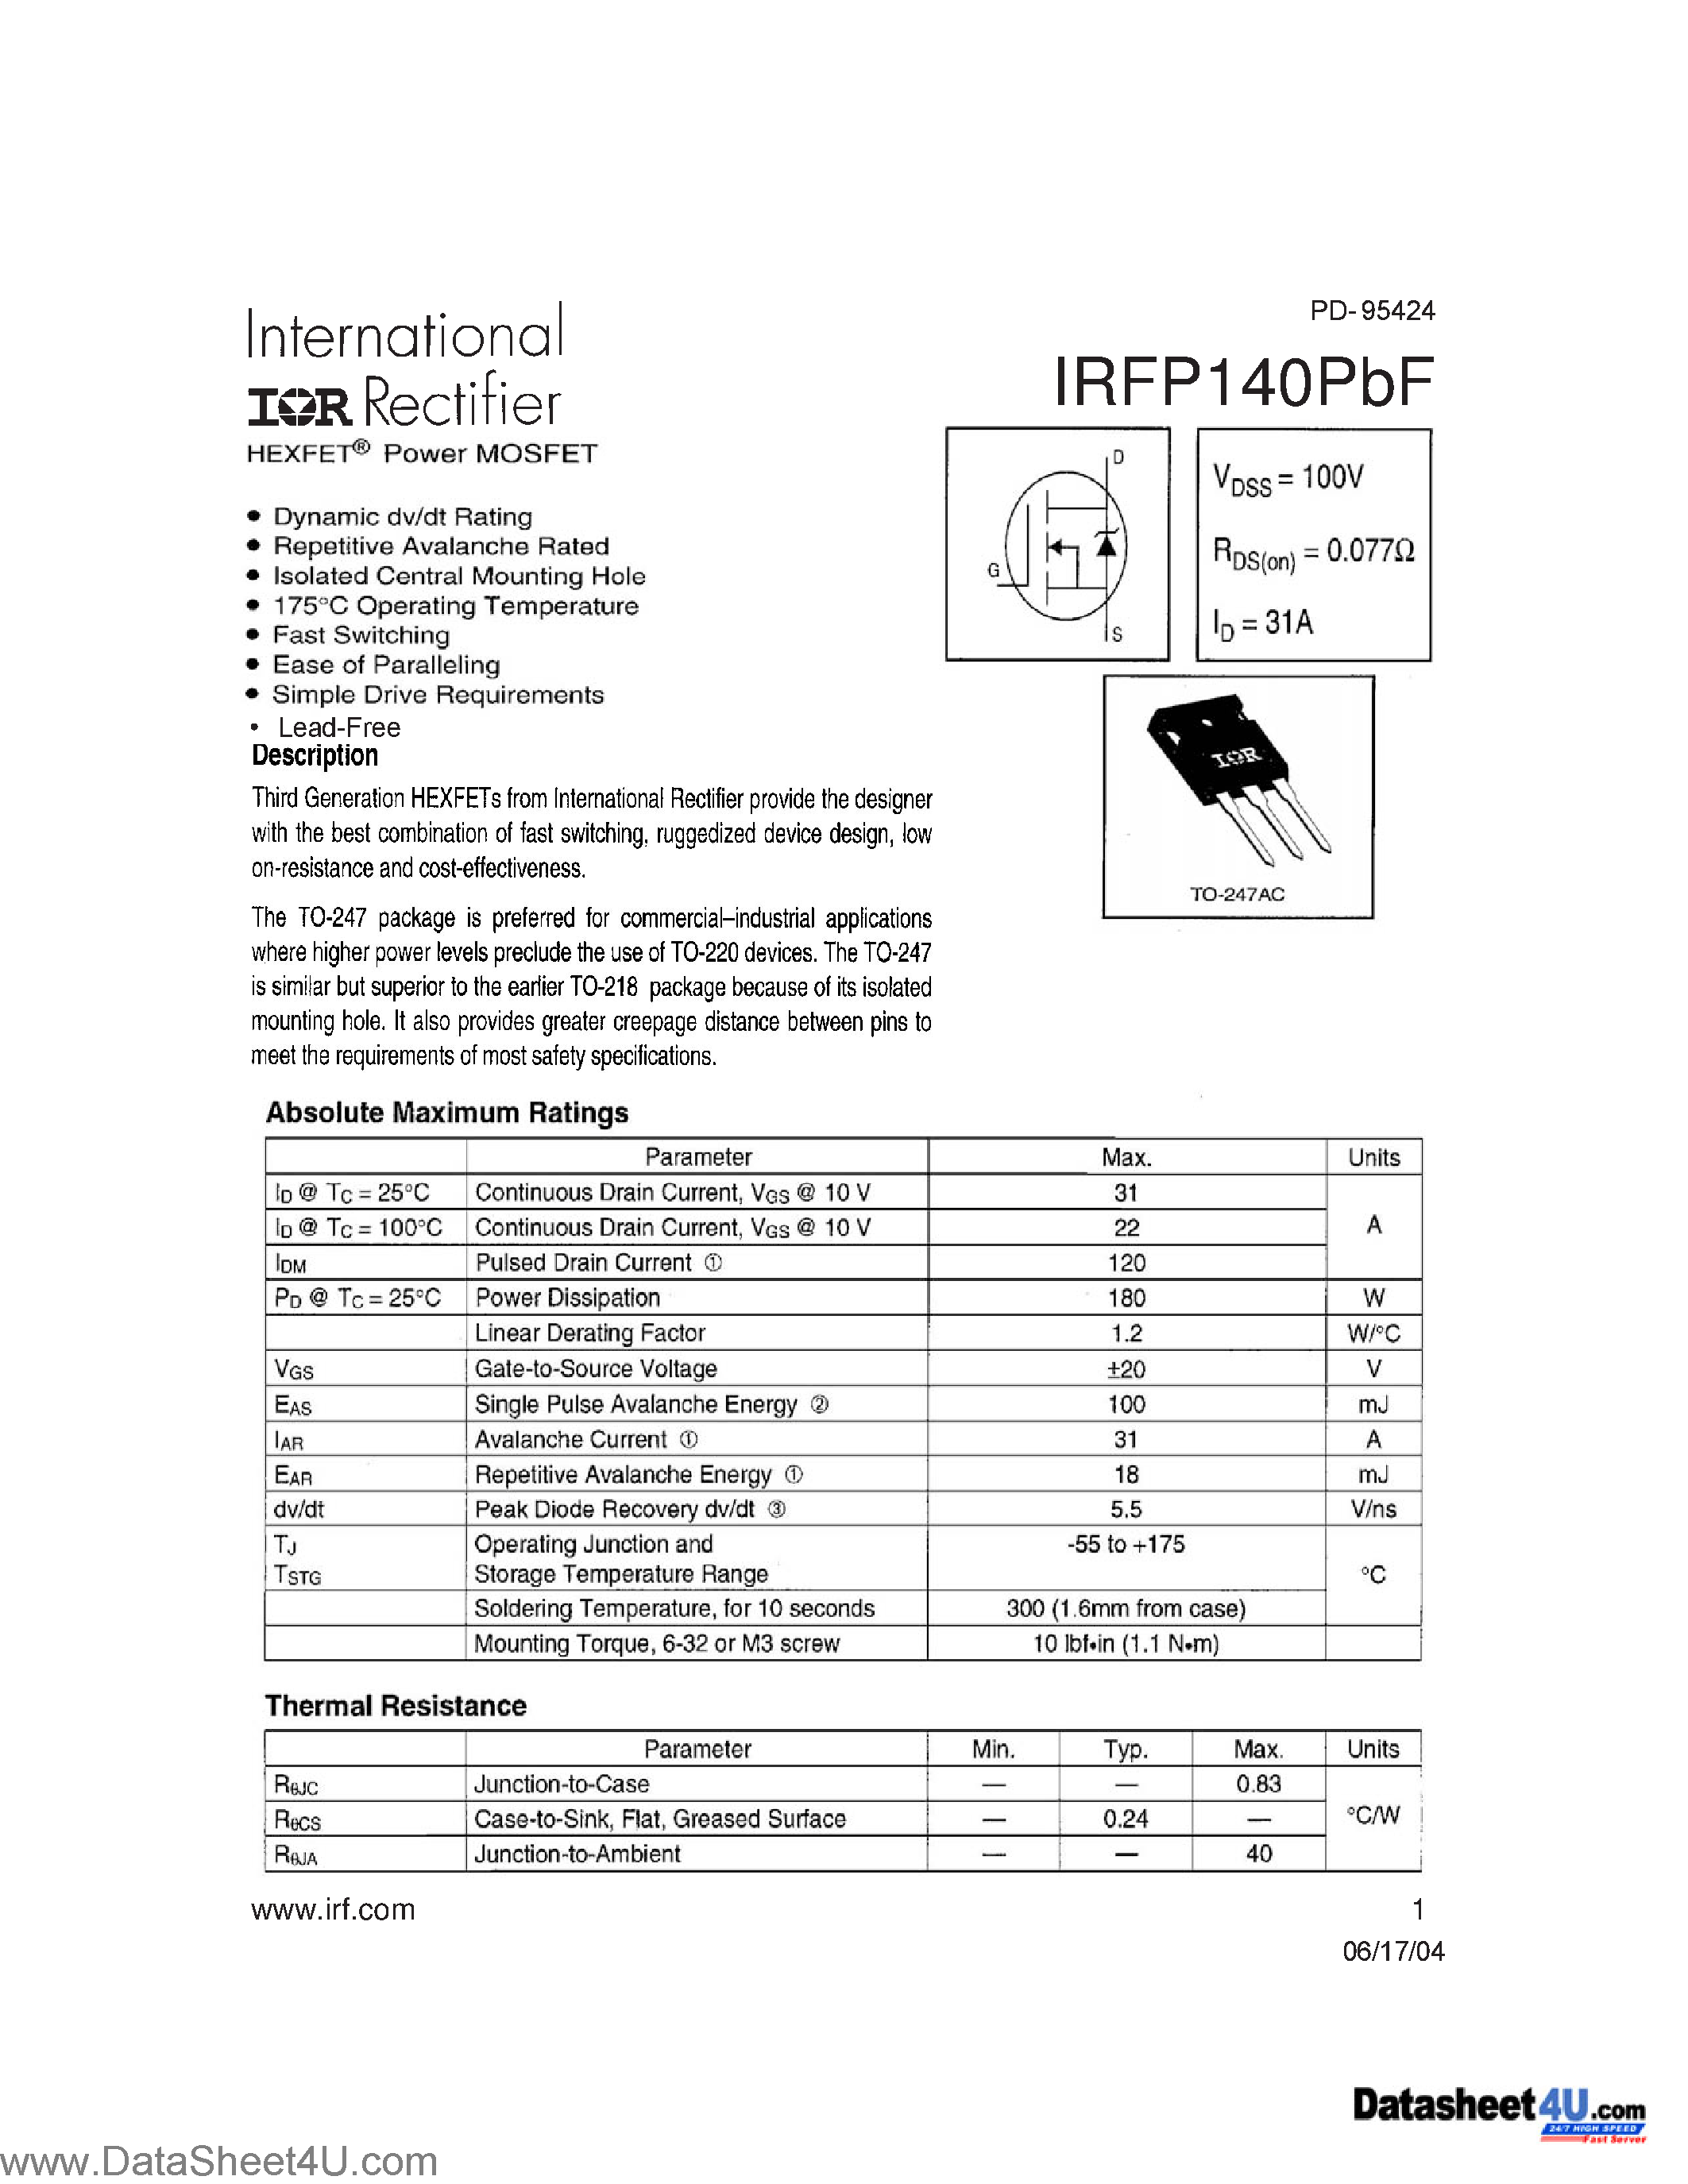 Datasheet IRFP140PBF - Preferred for commercail-industrial applications page 1